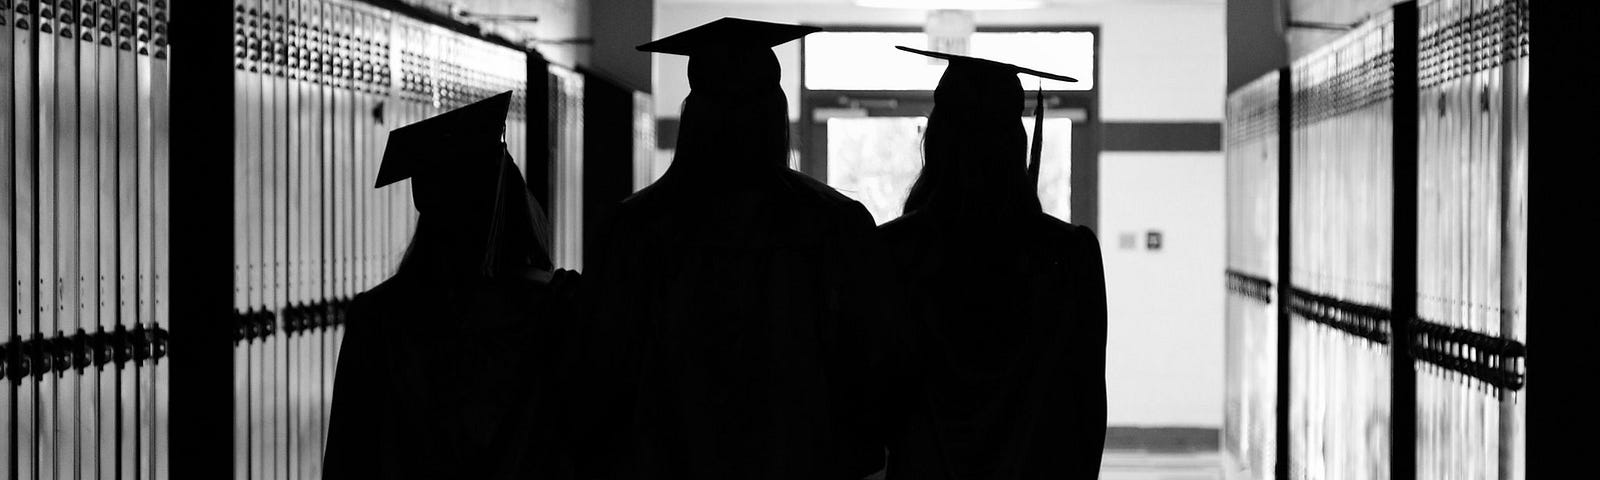 A black and white picture of three high school grads walking down the school hallway wearing their grad gowns.